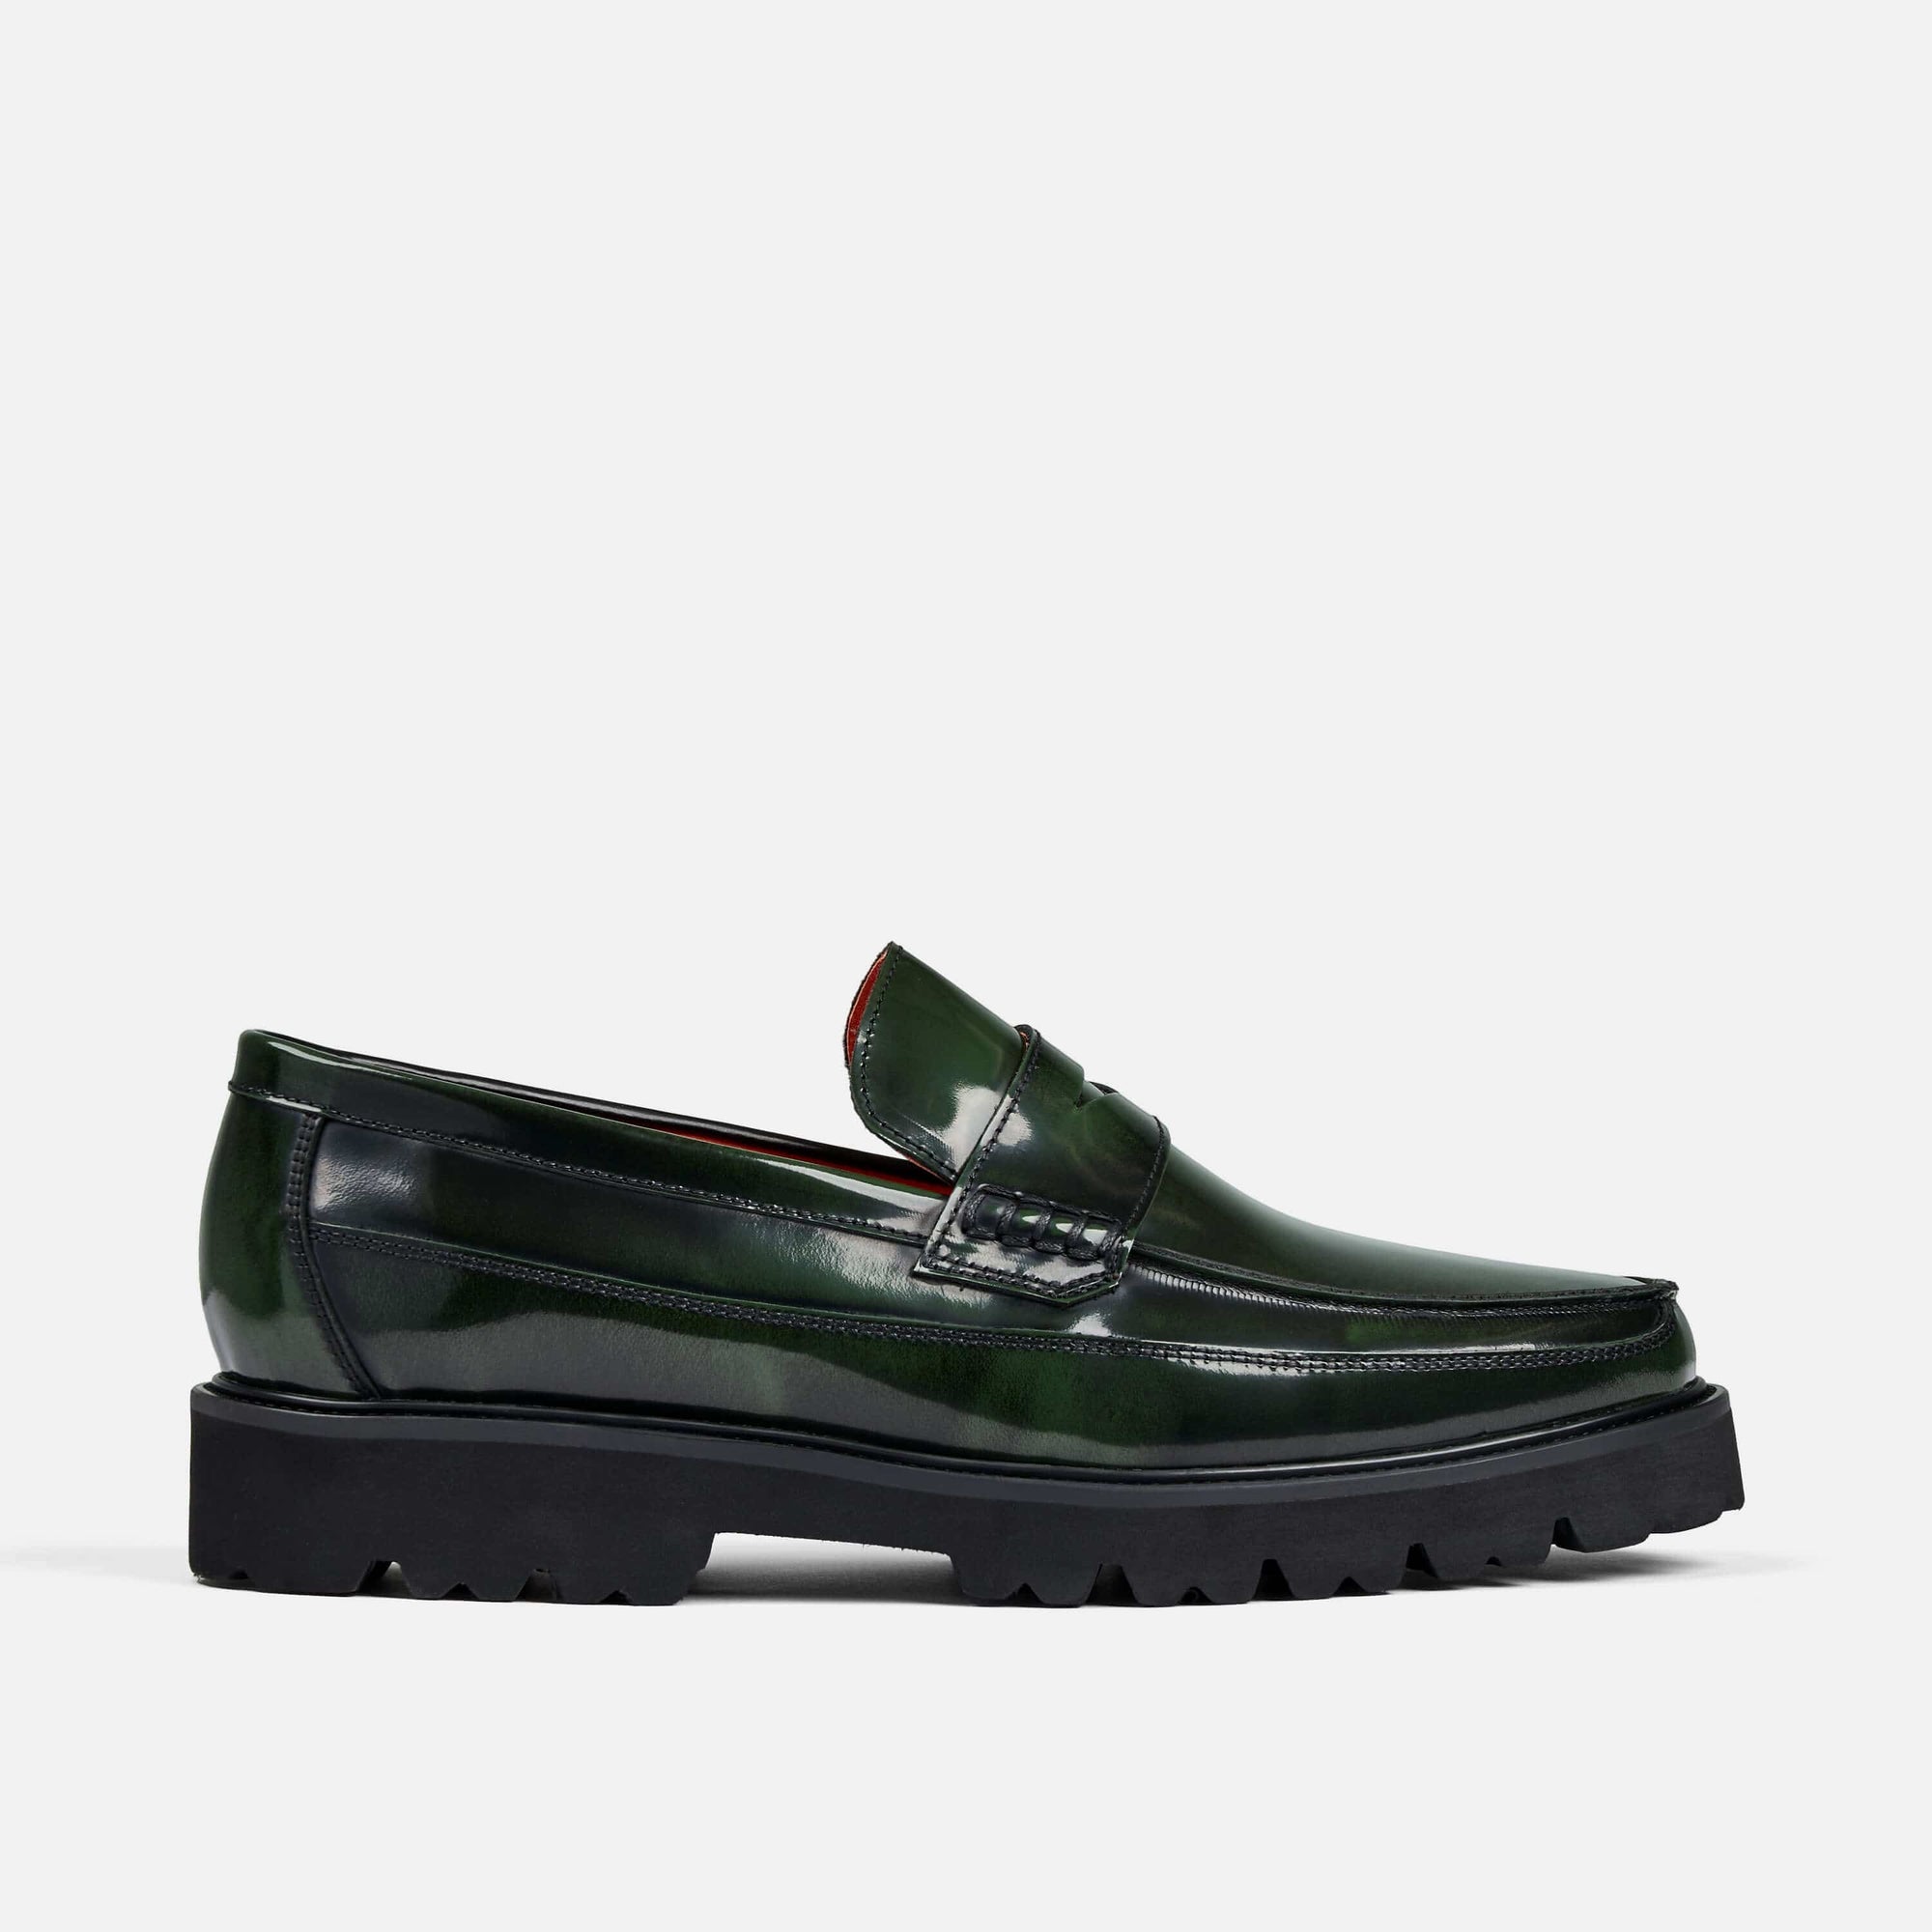 Adler Dark Green Patent Leather Penny Loafers - Marc Nolan